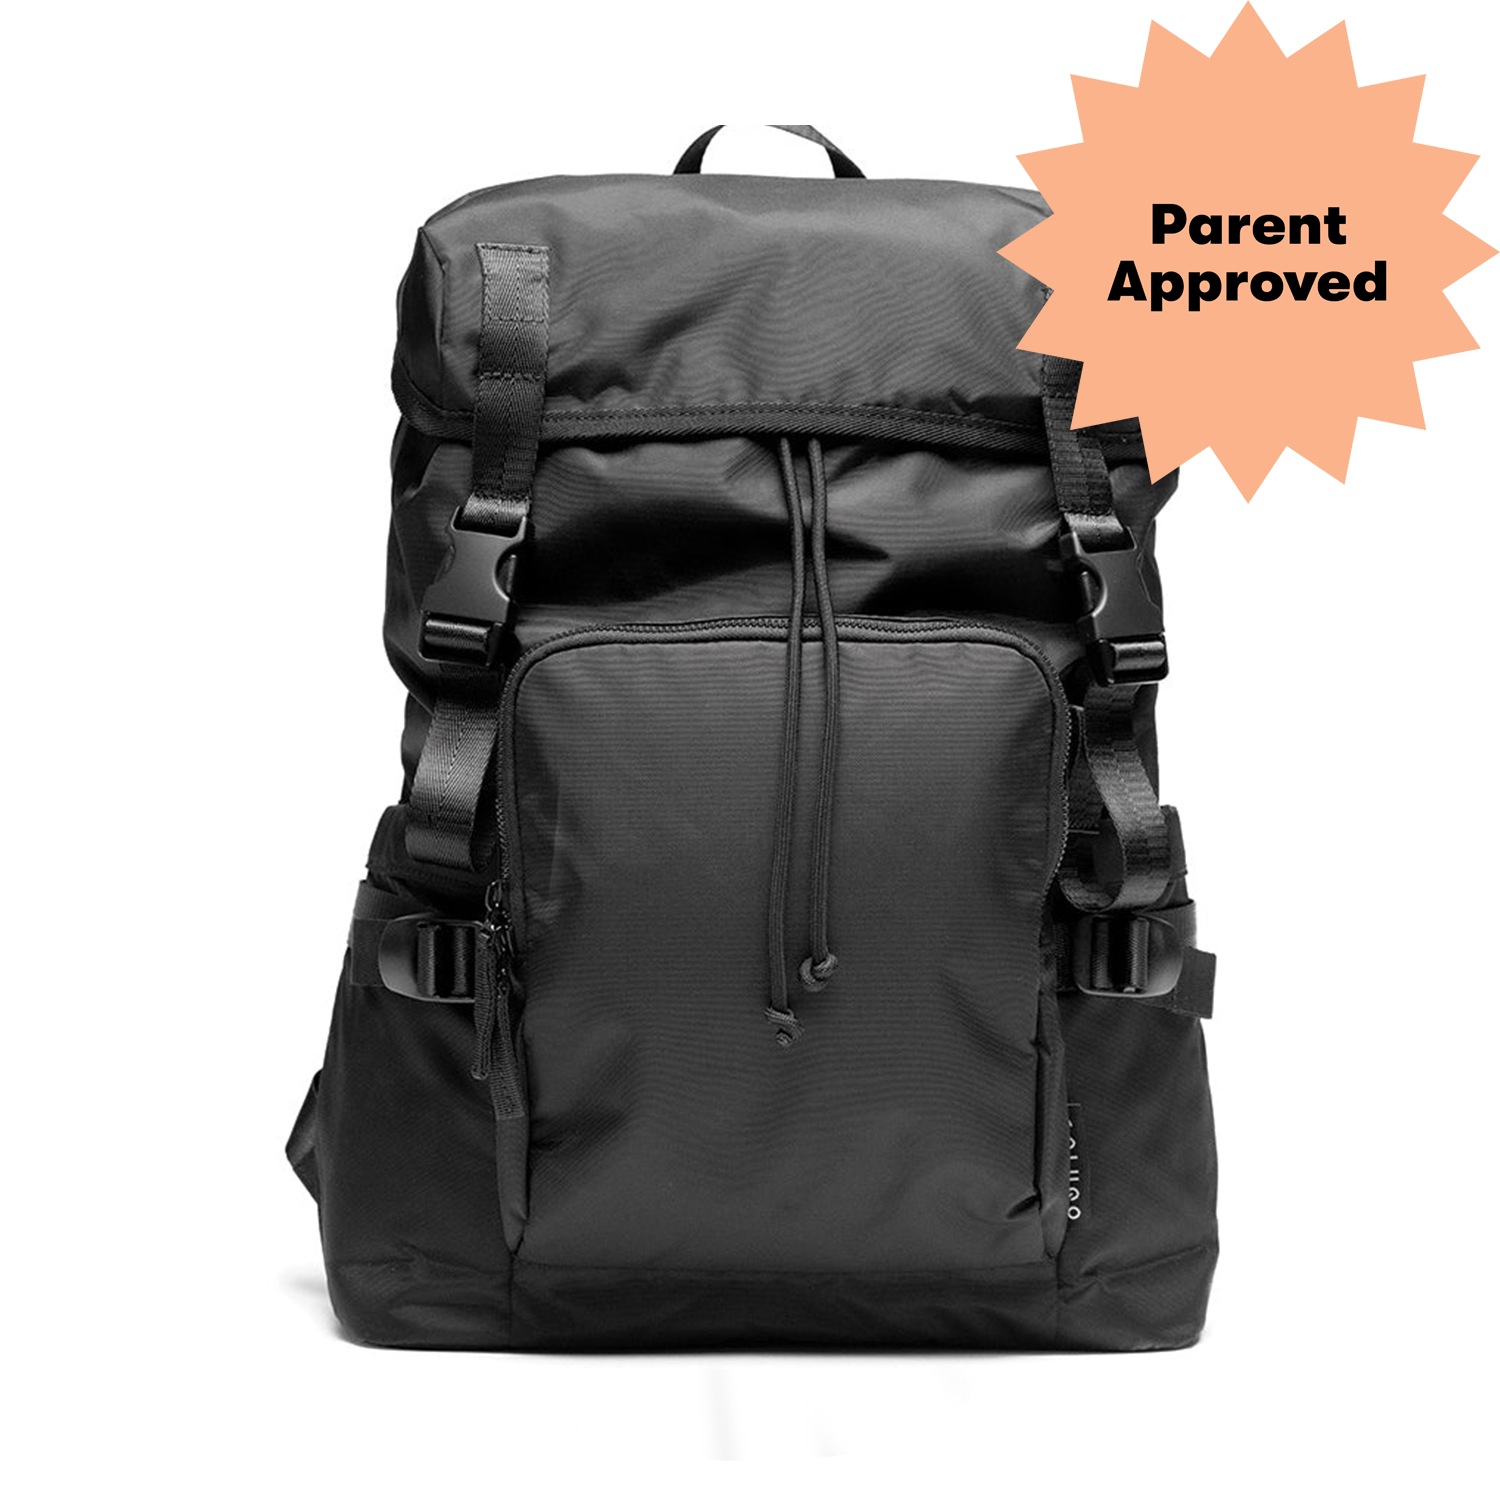 The Parent Backpack in Black